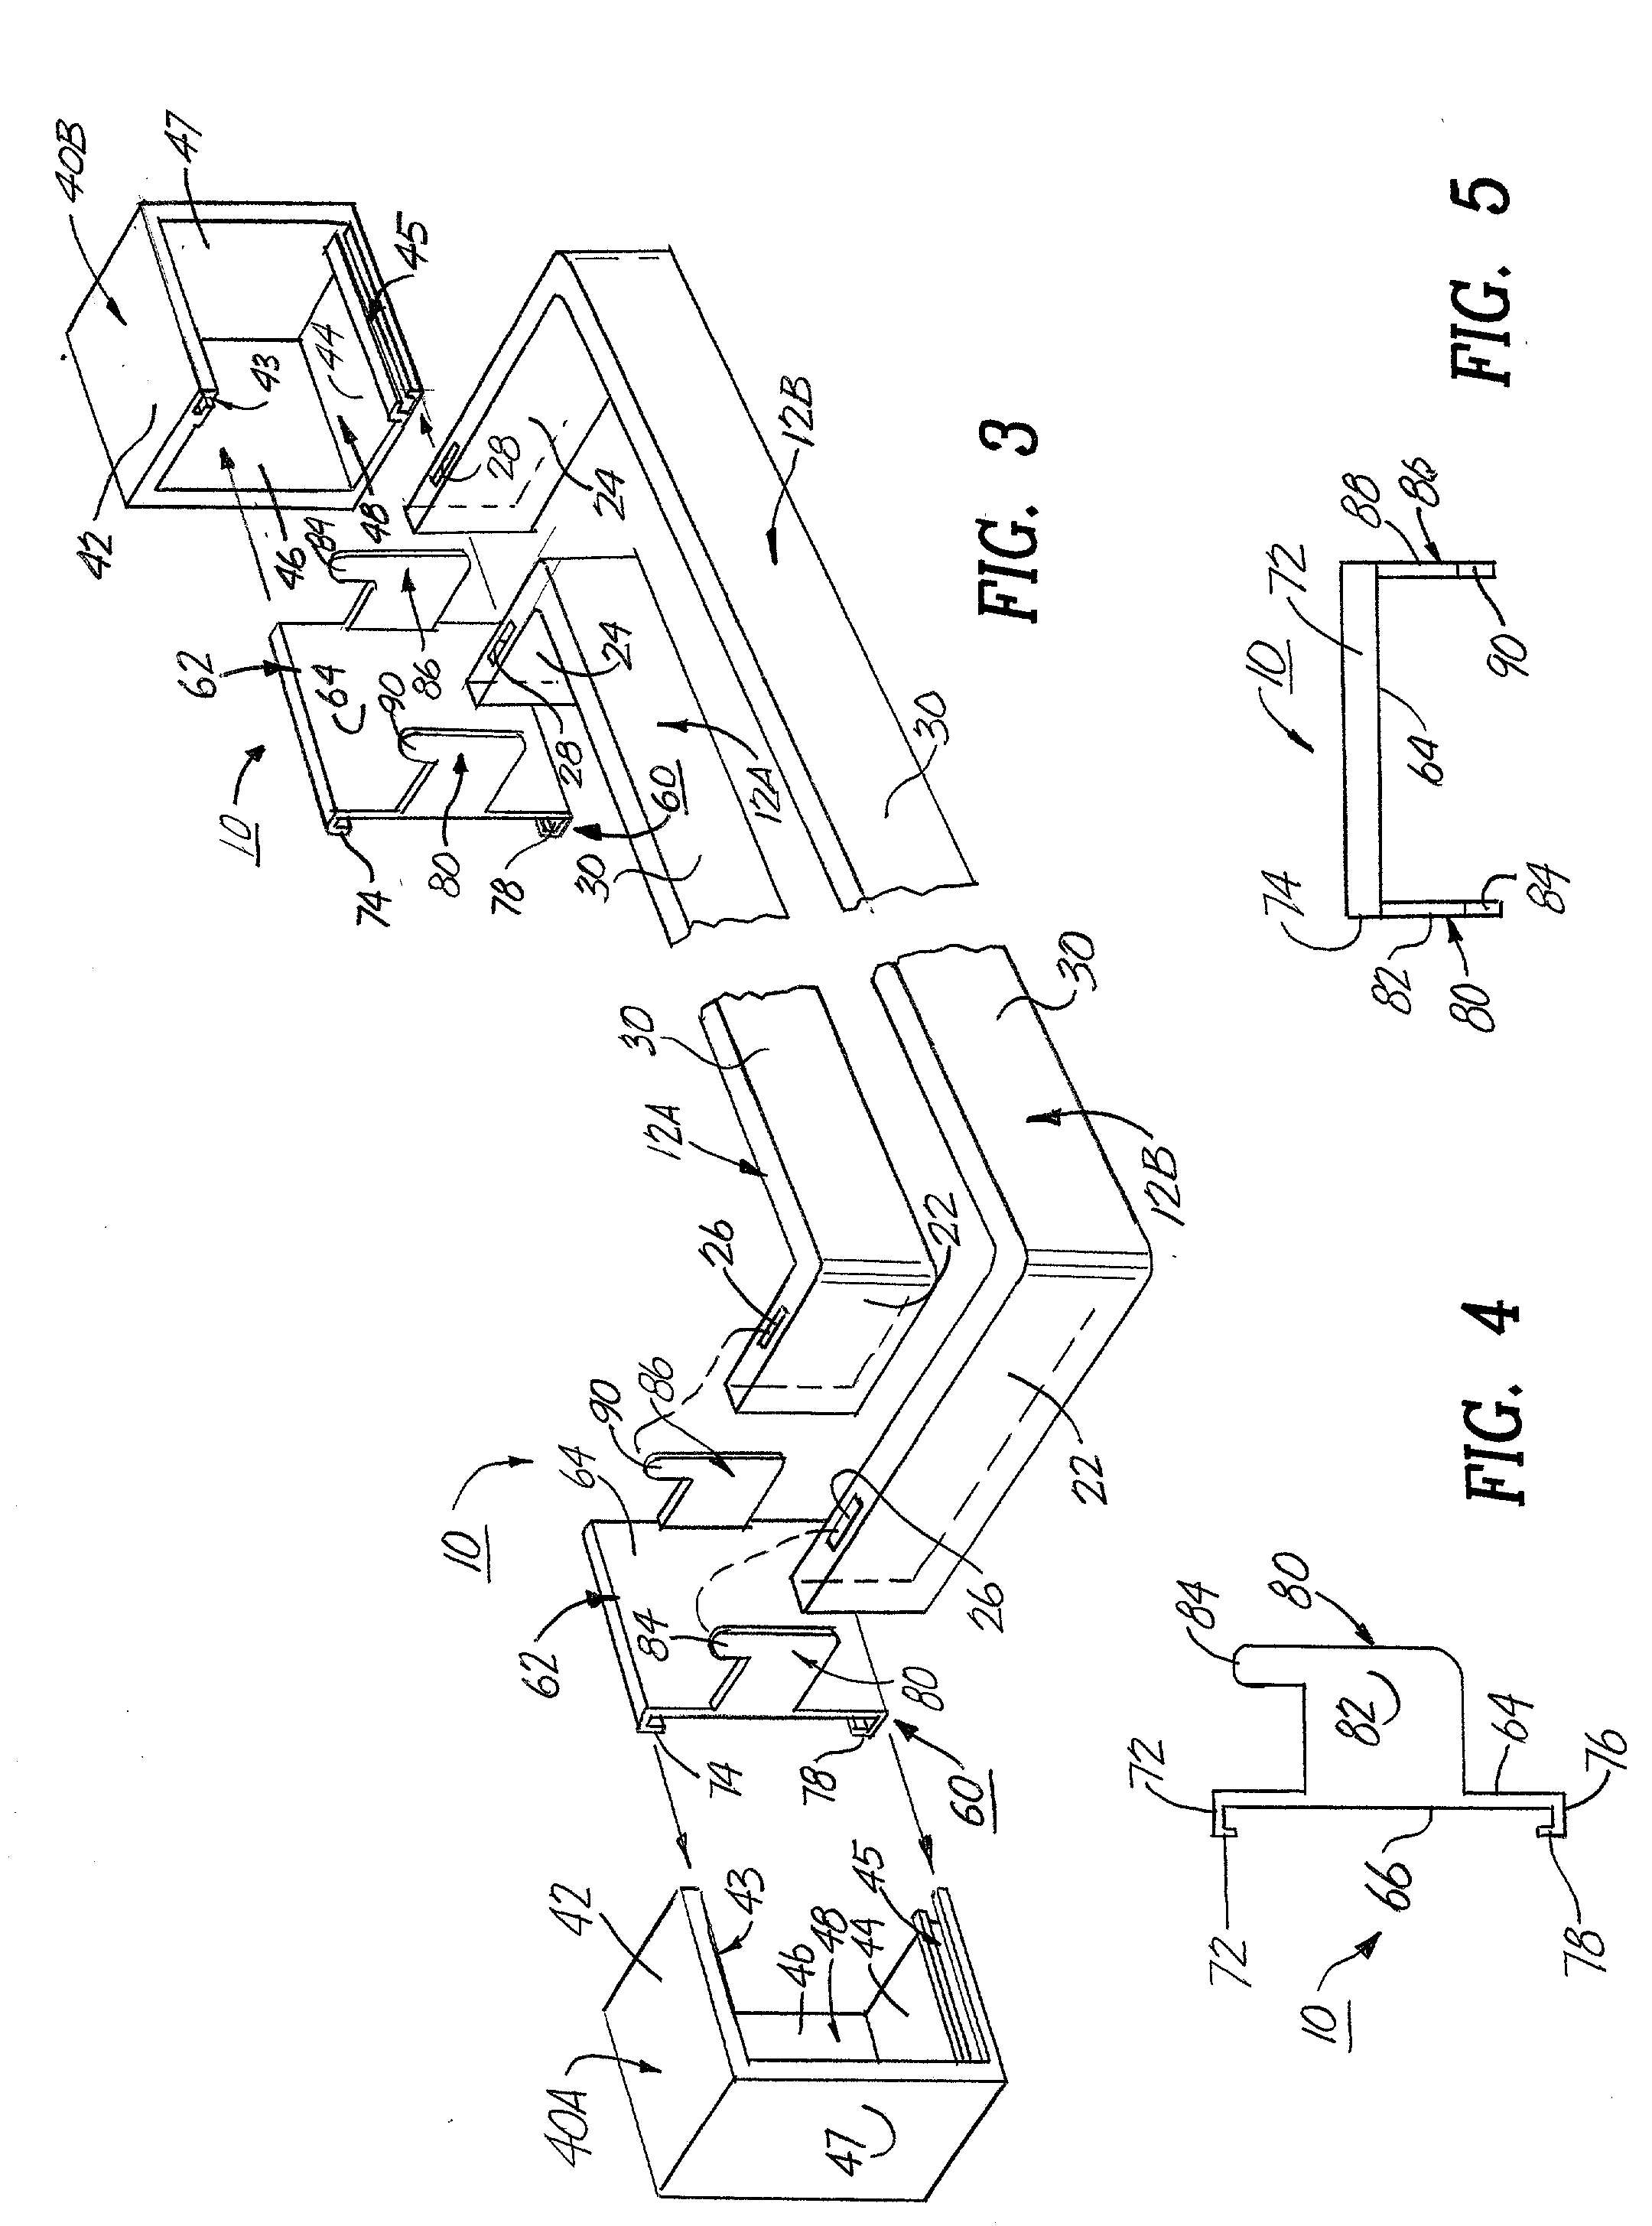 Mounting bracket for curtain rods